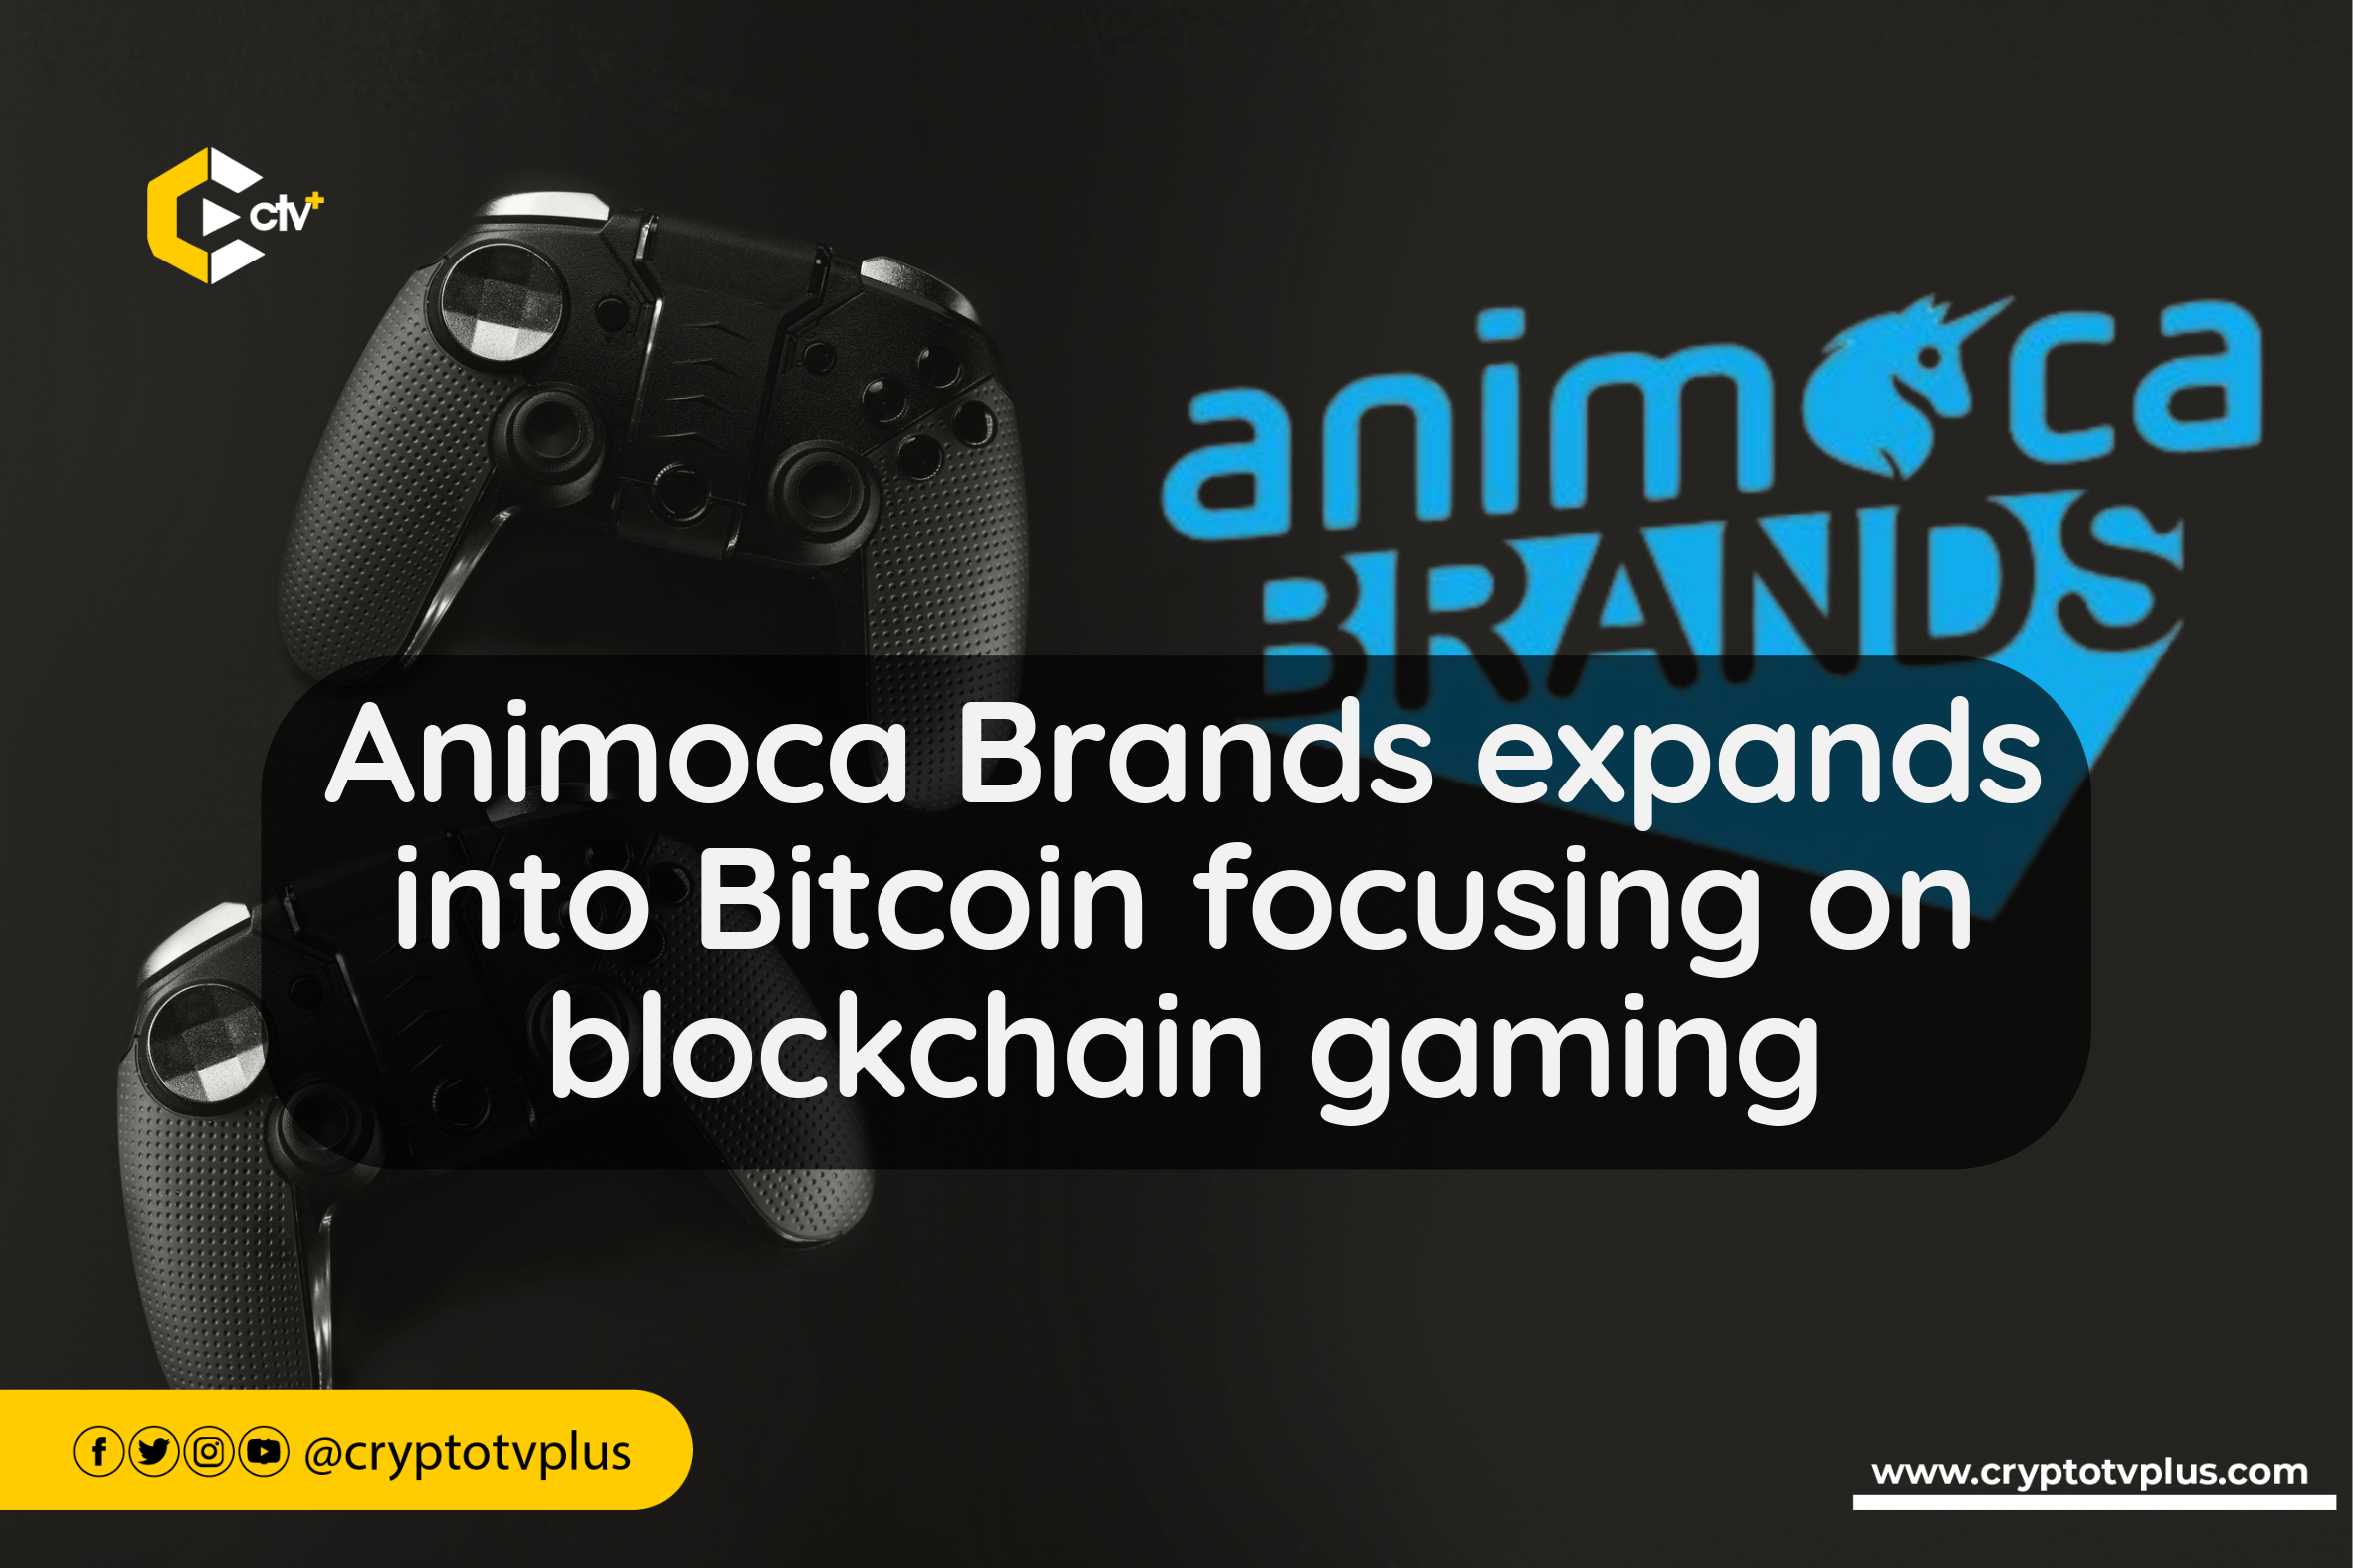 Animoca Brands is delving into the Bitcoin space, emphasizing blockchain gaming to revolutionize how we play and interact with digital assets.